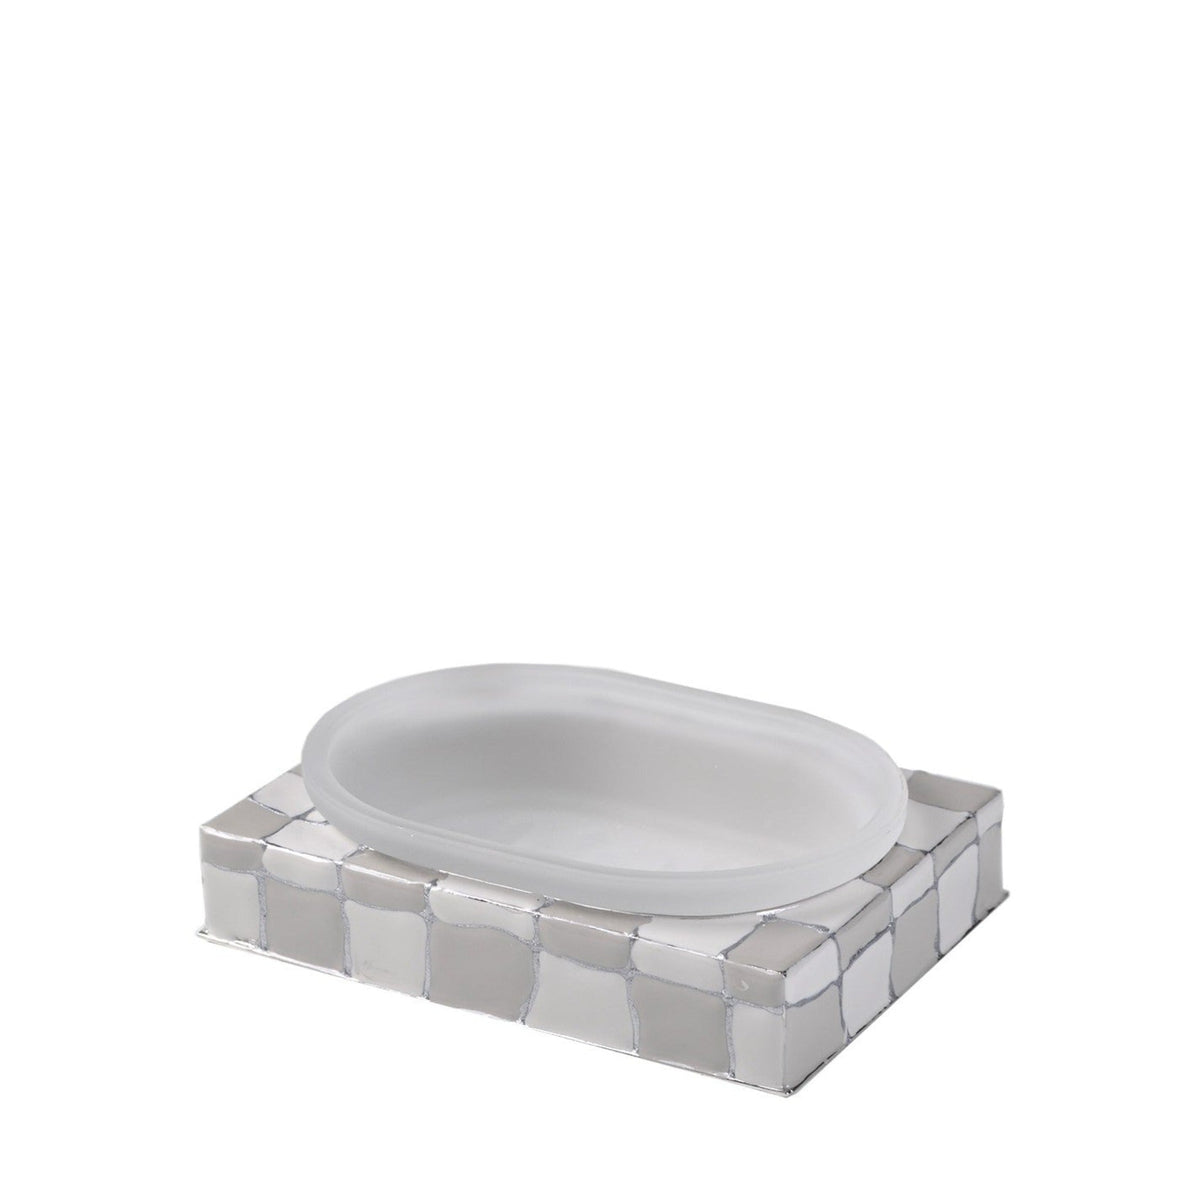 Closeup Image of Mike and Ally Quattro Bath Soap Dish in Coffee/Mist/Silver